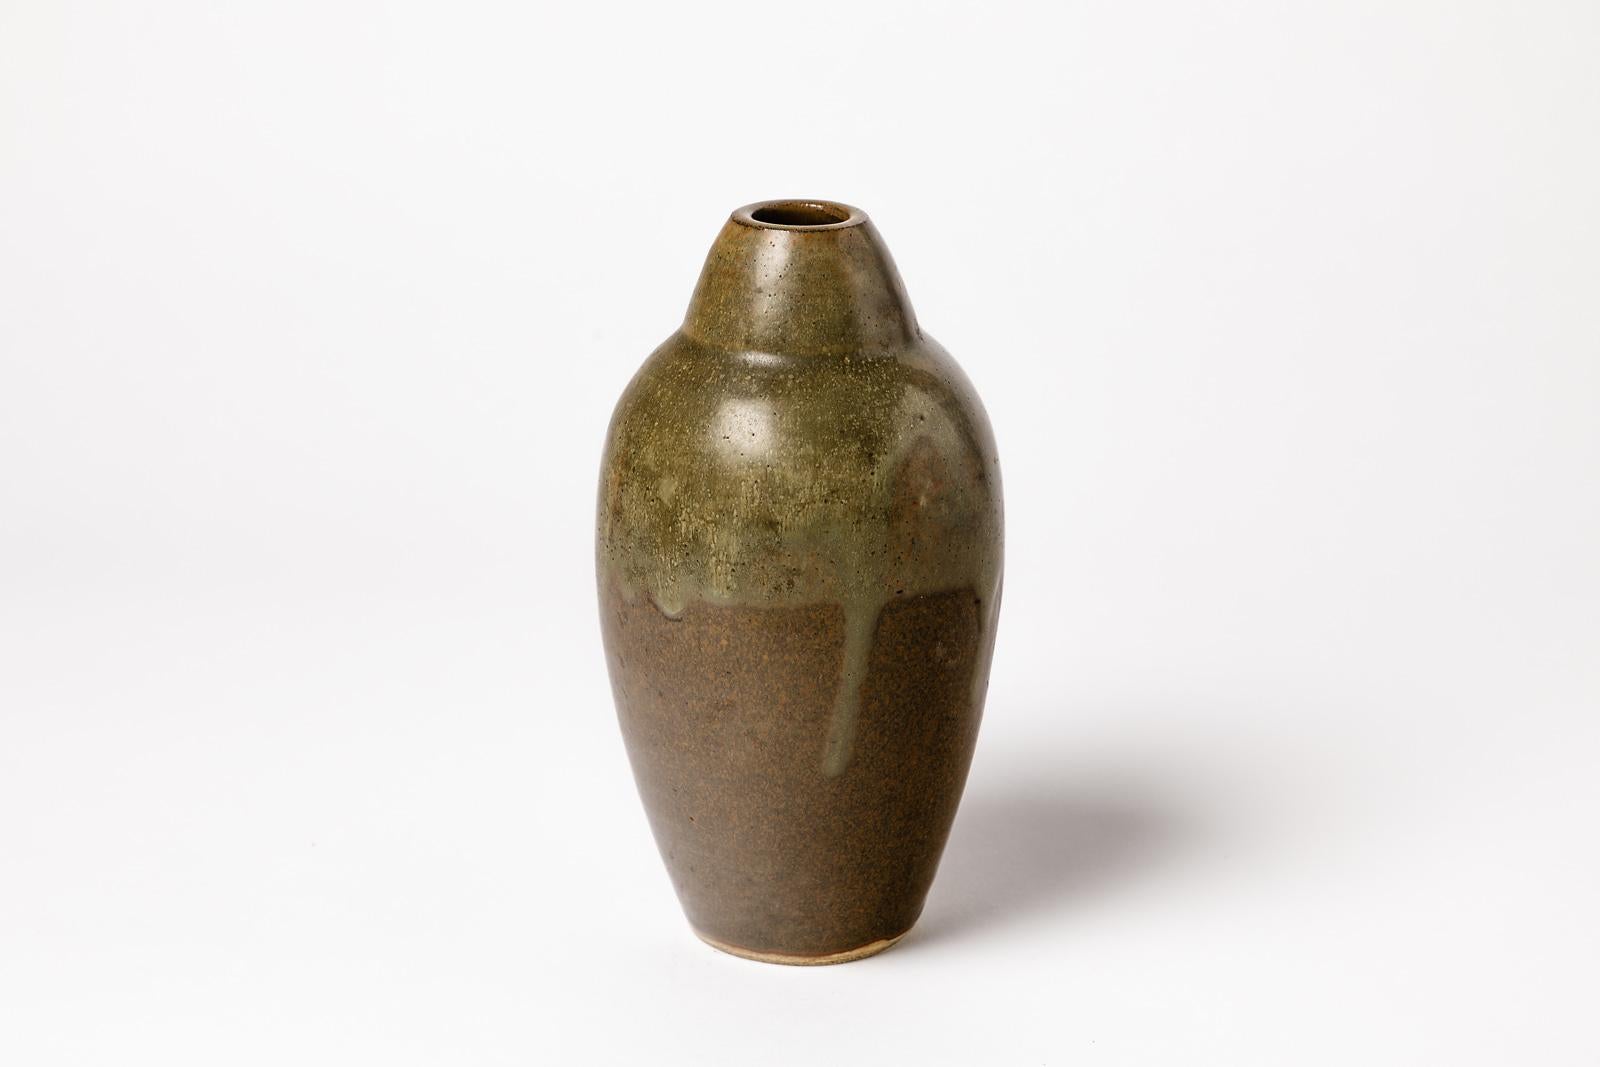 Armand Bedu

circa 1950, in la Borne, famous potter center in France.

Mid-20th century elegant and shiny stoneware ceramic vase by French artist. Green and brown ceramic glaze colors.

Signed under the base

Dimensions : height 18cm large